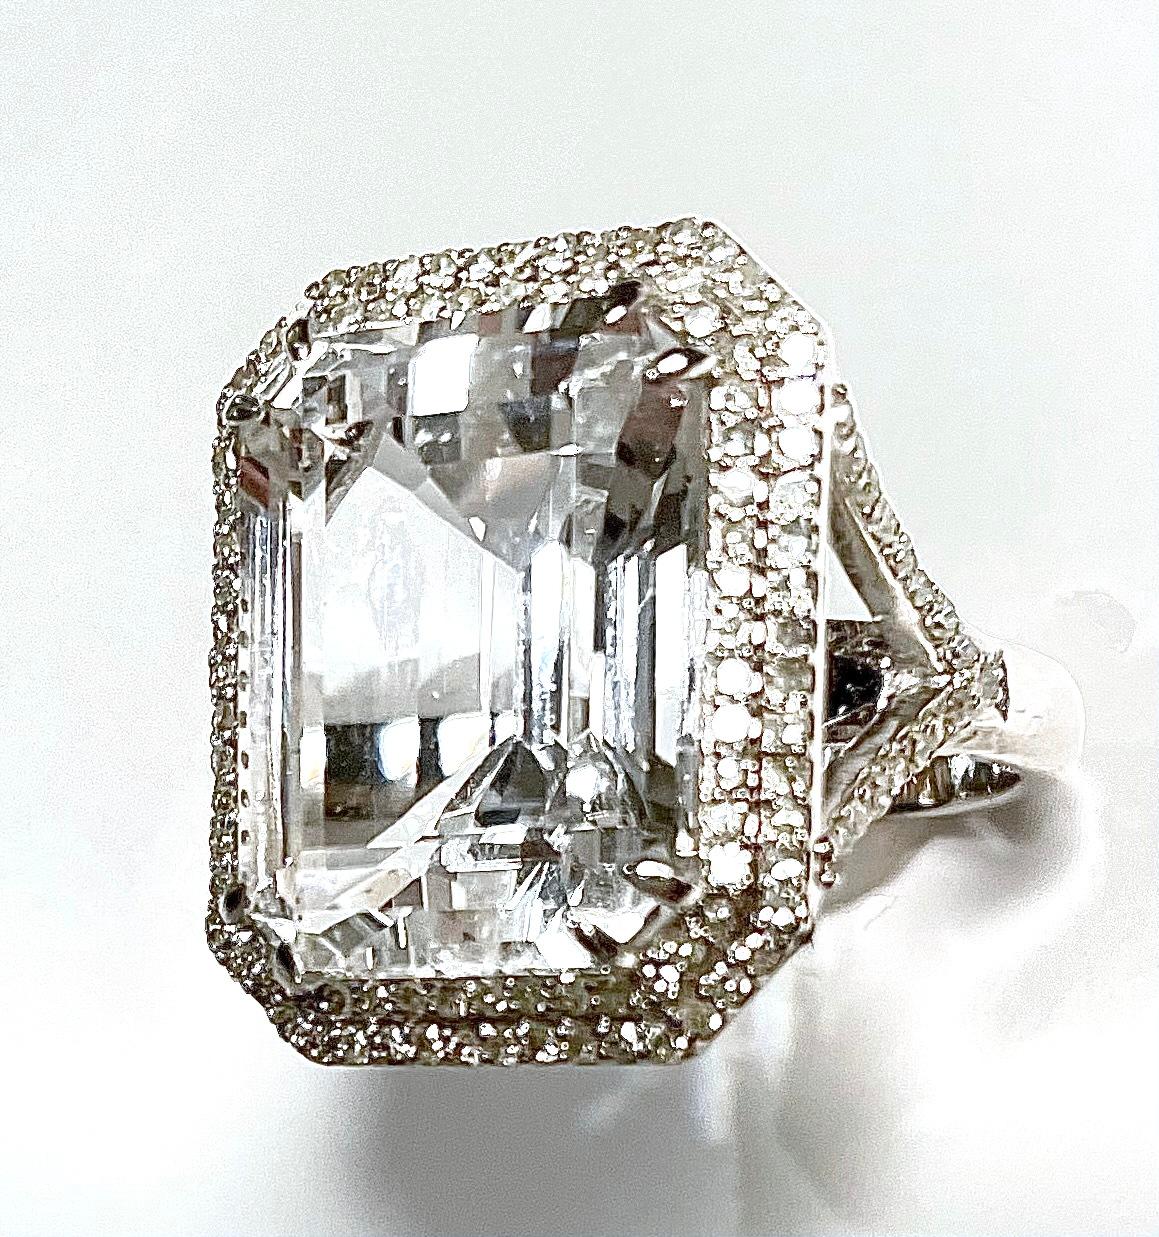 Description
Impressive large emerald cut White Topaz and pave diamond 14k white gold ring
Item # R155

Materials and Weight
White topaz, 14 x 18 mm, emerald cut 17 carats
Diamonds 0.90cts
14k white gold

Dimensions
Size 7

Made in Newport Beach,